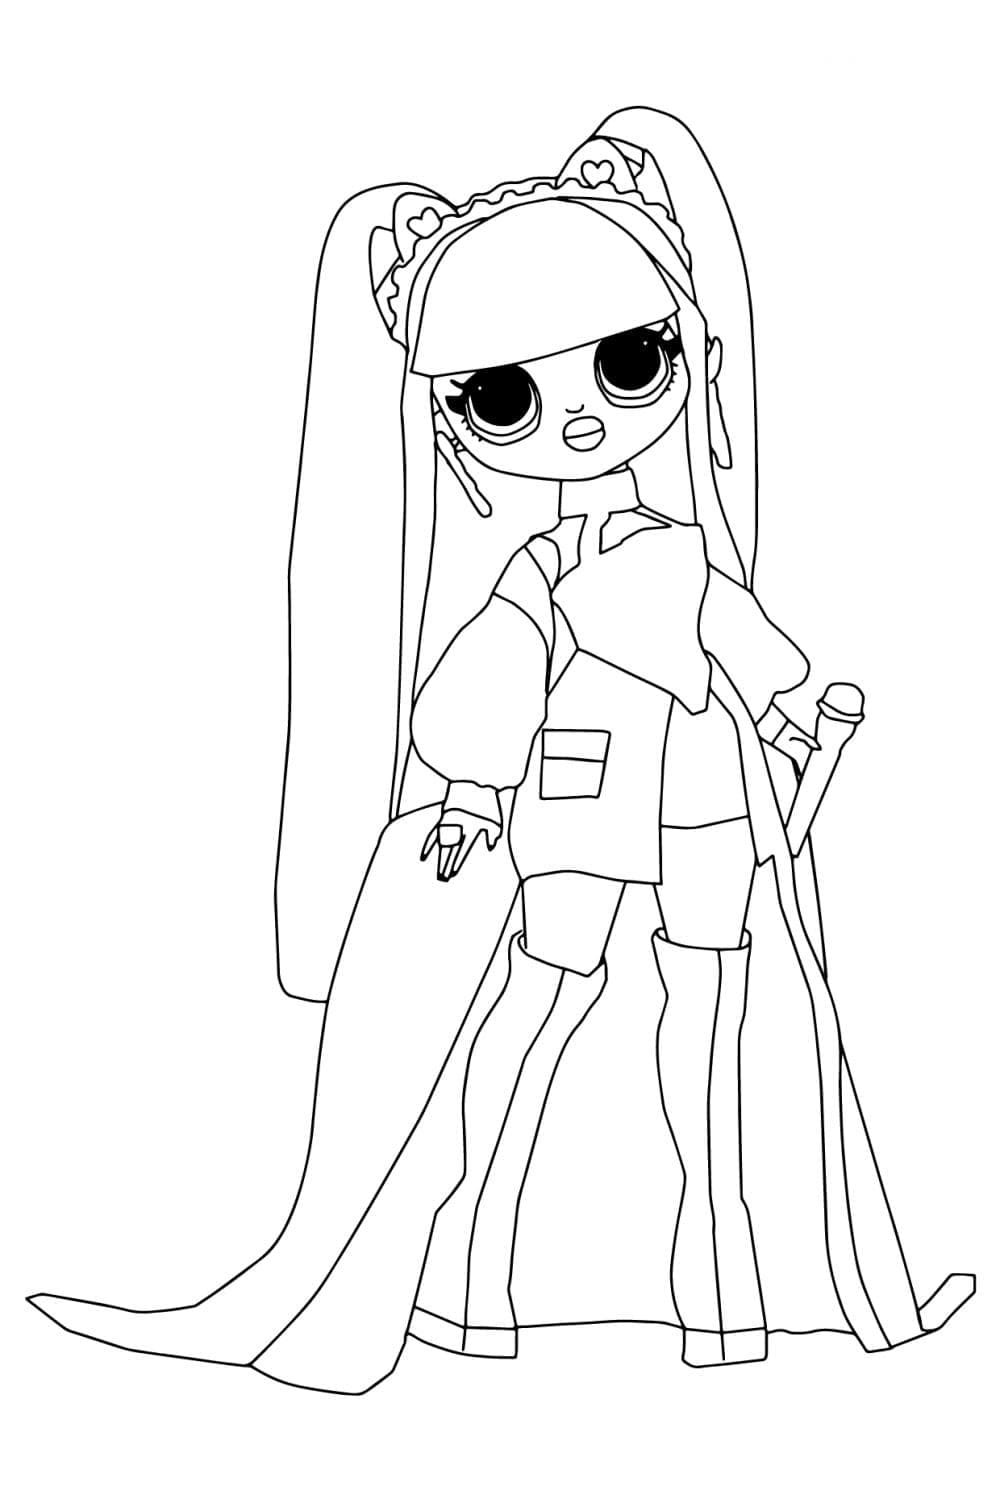 Kitty K LOL OMG coloring page